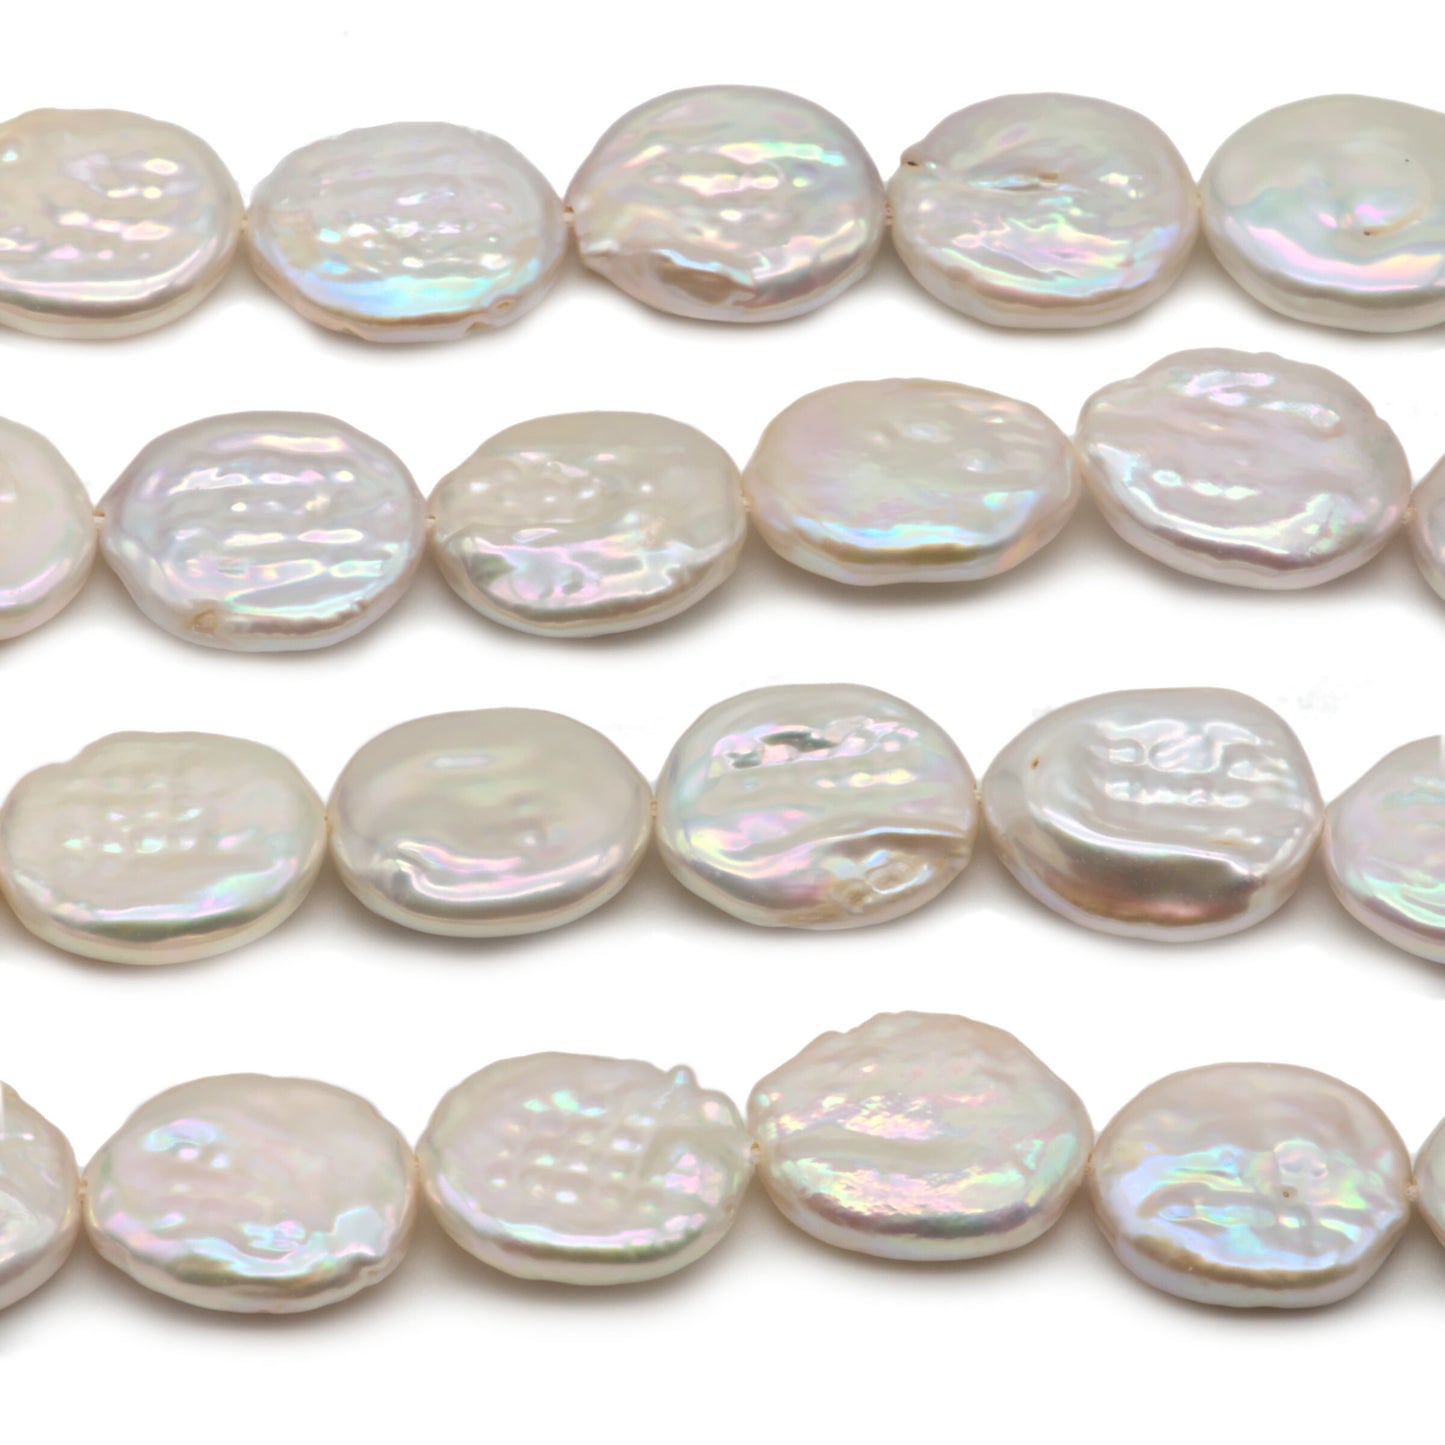 Coin Pearls, Freshwater Cultured Pearls in White Colors 14-15mm, Genuine Pearl, SKU# COIN009